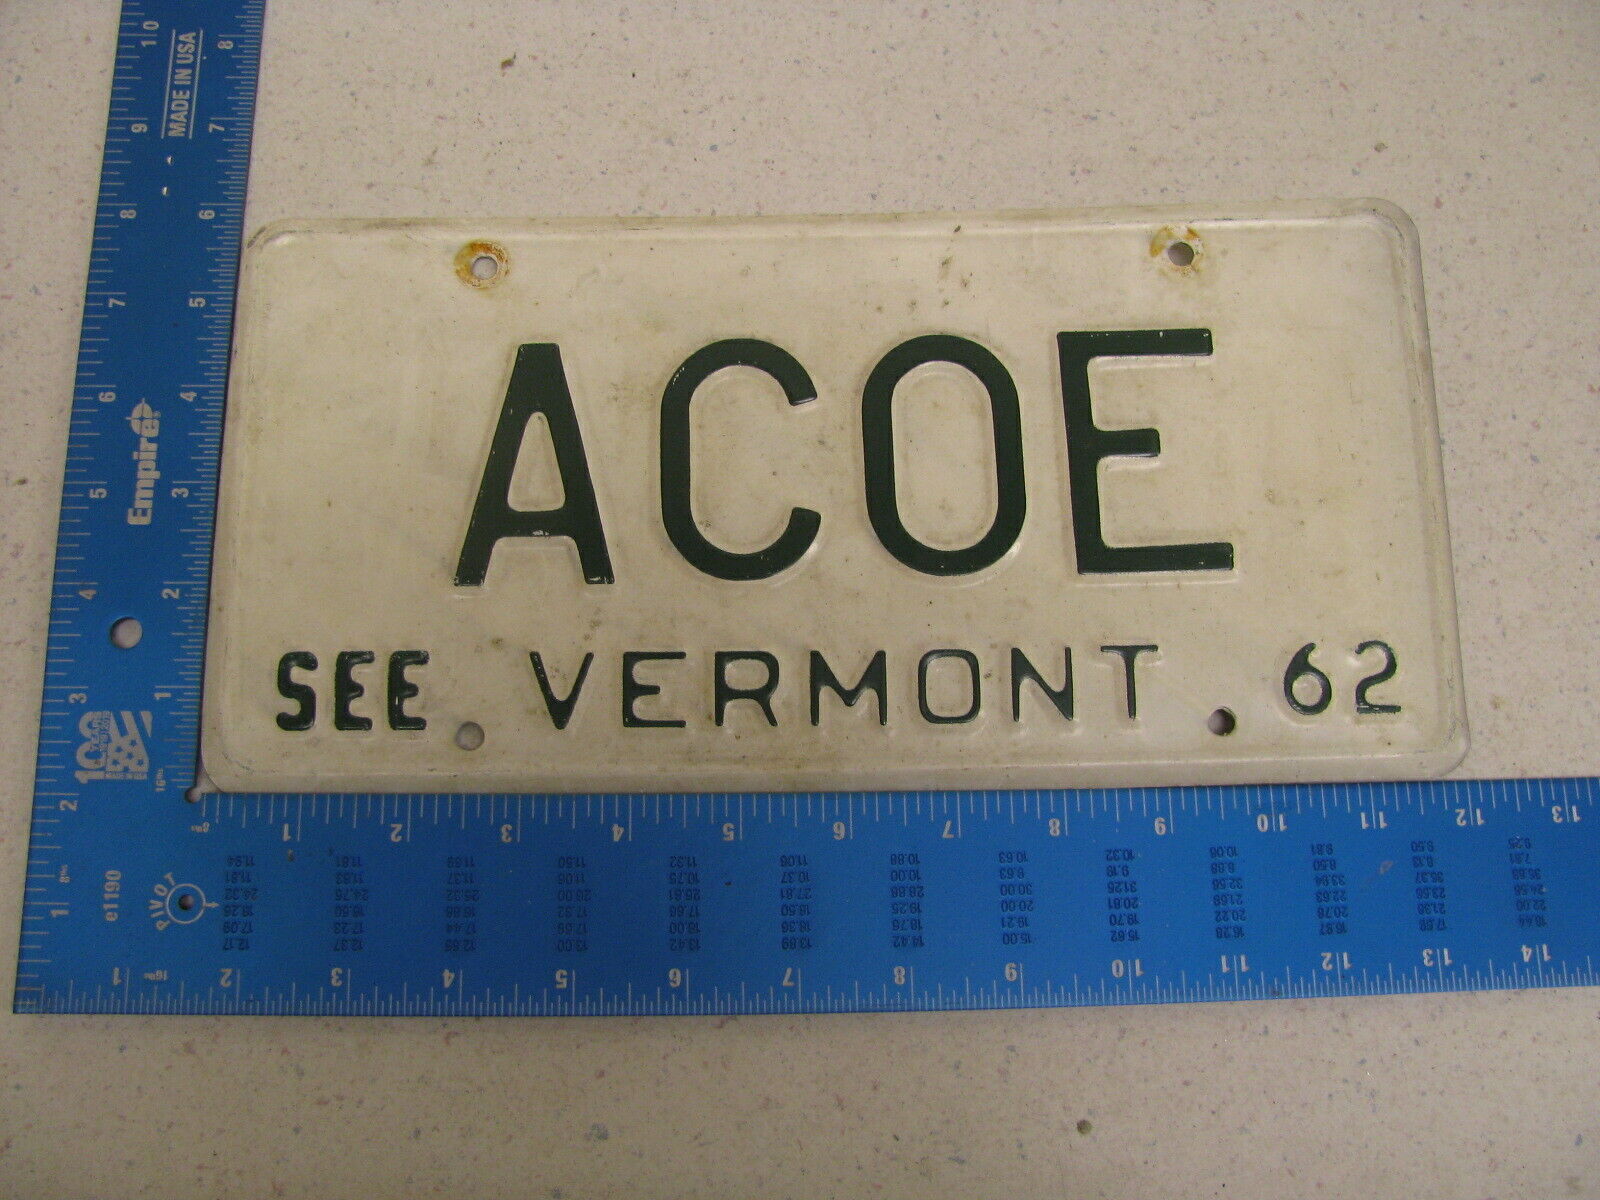 1962 62 VERMONT VT VANITY LICENSE PLATE ACOE ARMY CORPS OF ENGINEERS 